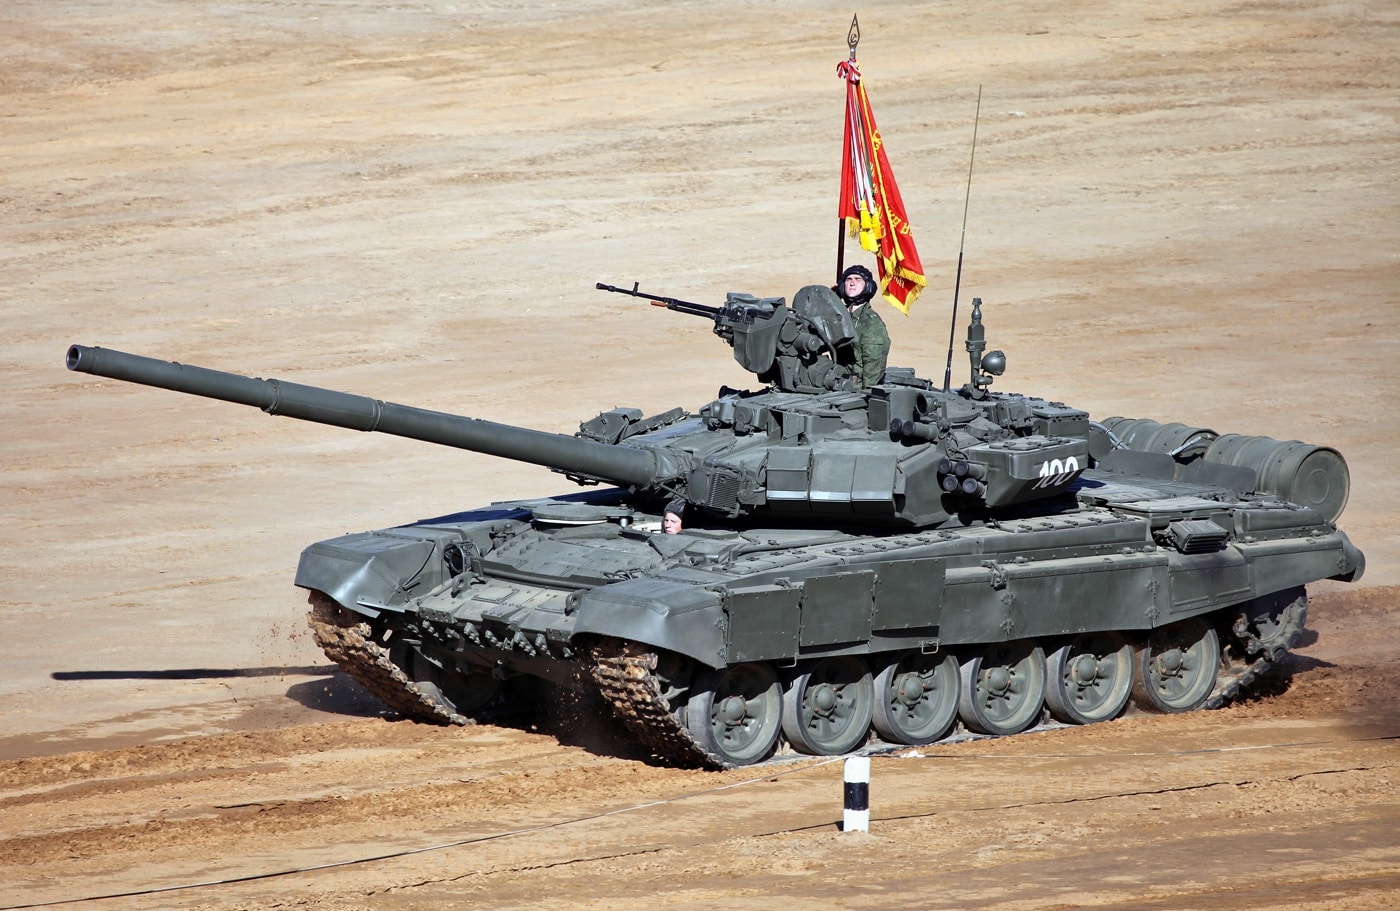 This Russian T-90 main battle tank participates in a 20213 armored vehicle competition. The three man tank crew is visible.